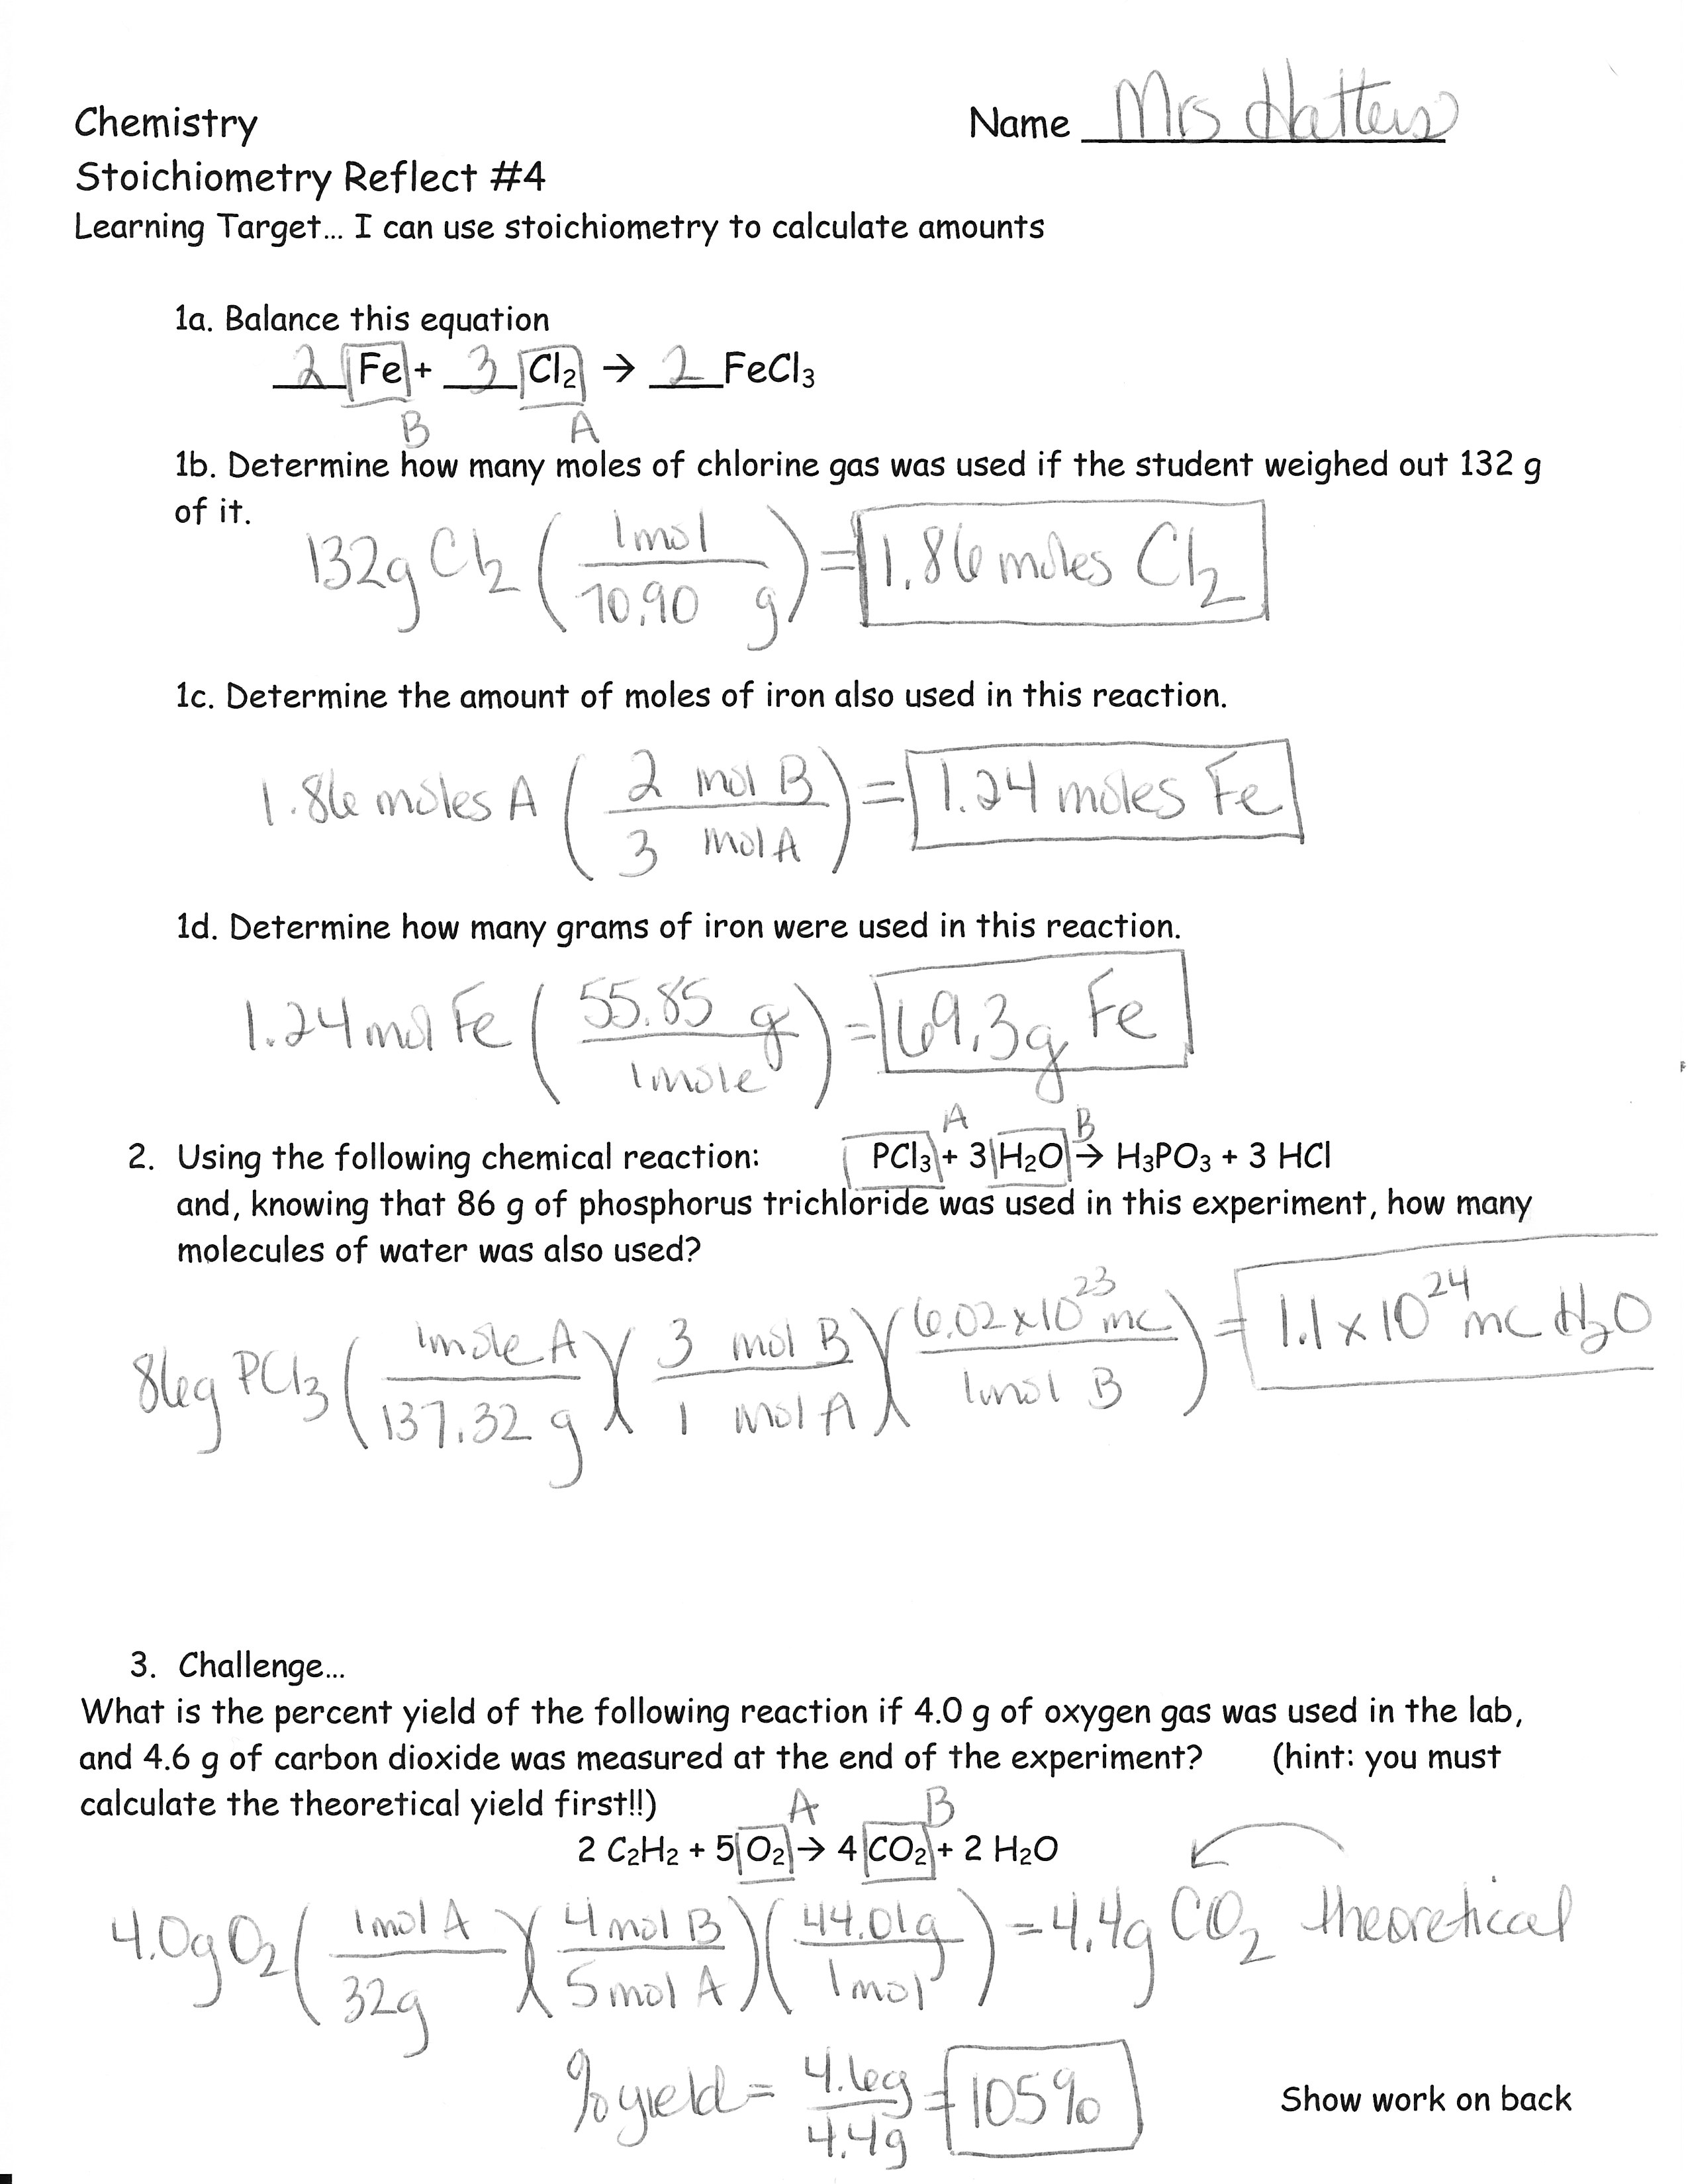 Printables Stoichiometry Worksheets stoichiometry worksheets plustheapp the reflect review expires 2 17 2014